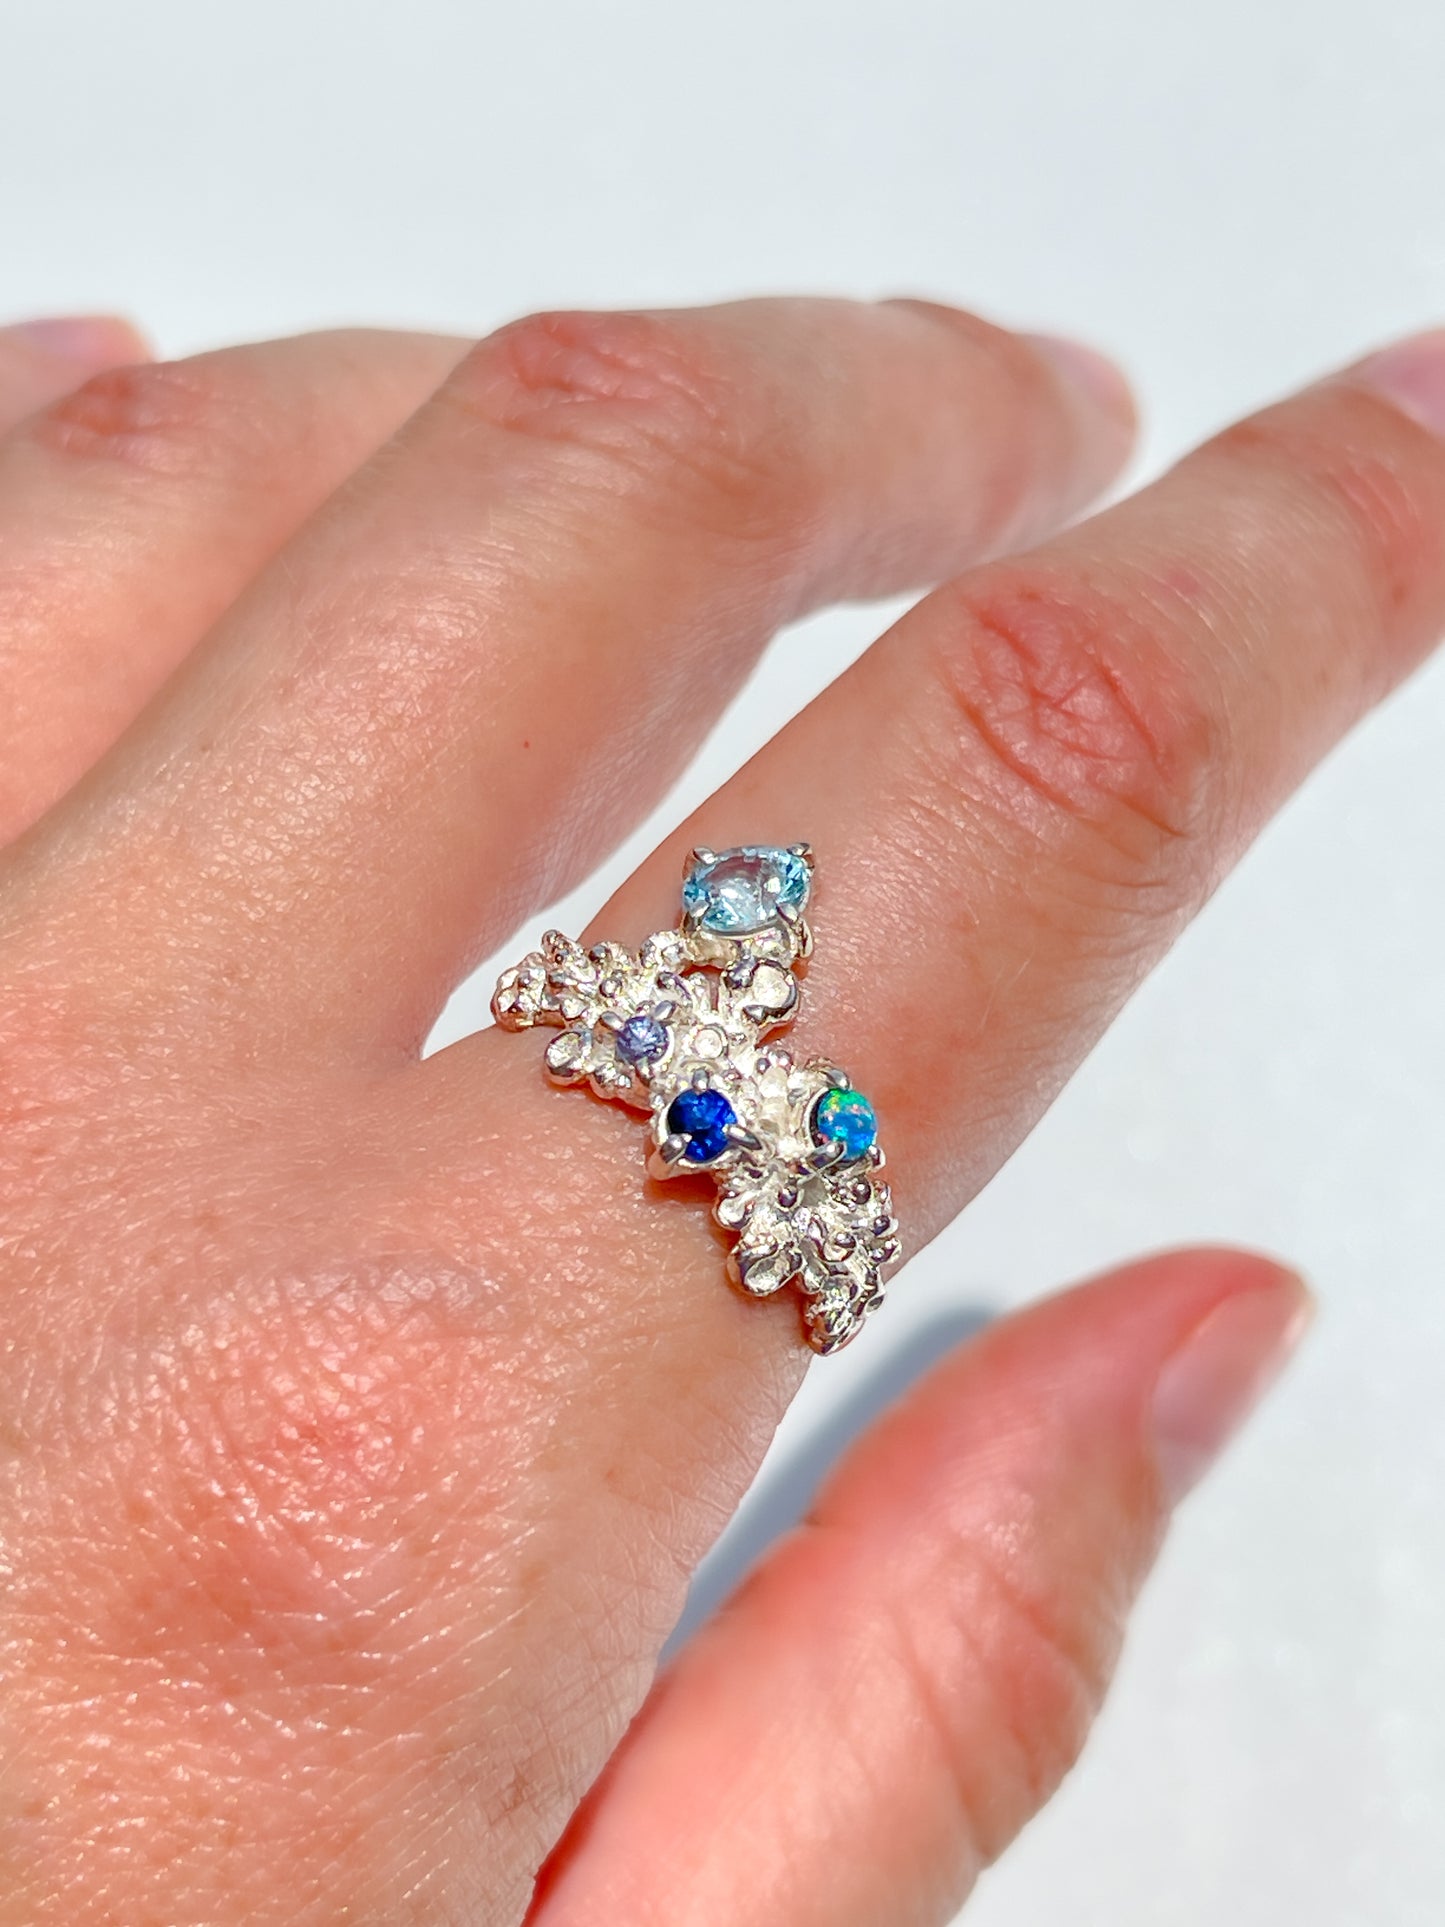 Coral Ring Silver with Blue Sapphires, Opals, & a large Aquamarine gemstones  - size 8